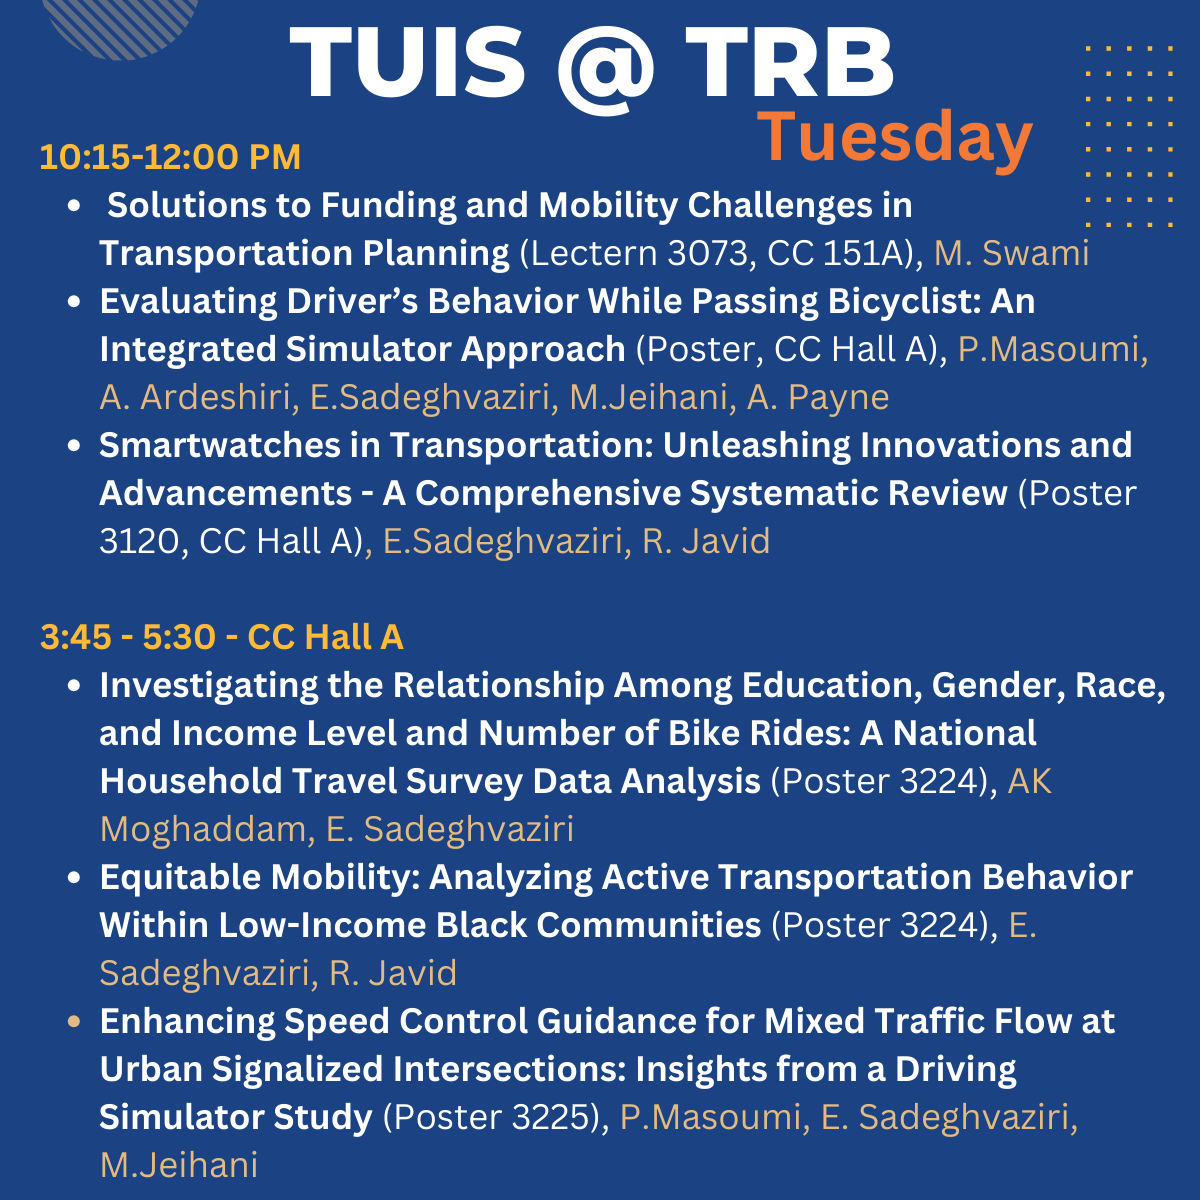 TUIS sessions at TRB